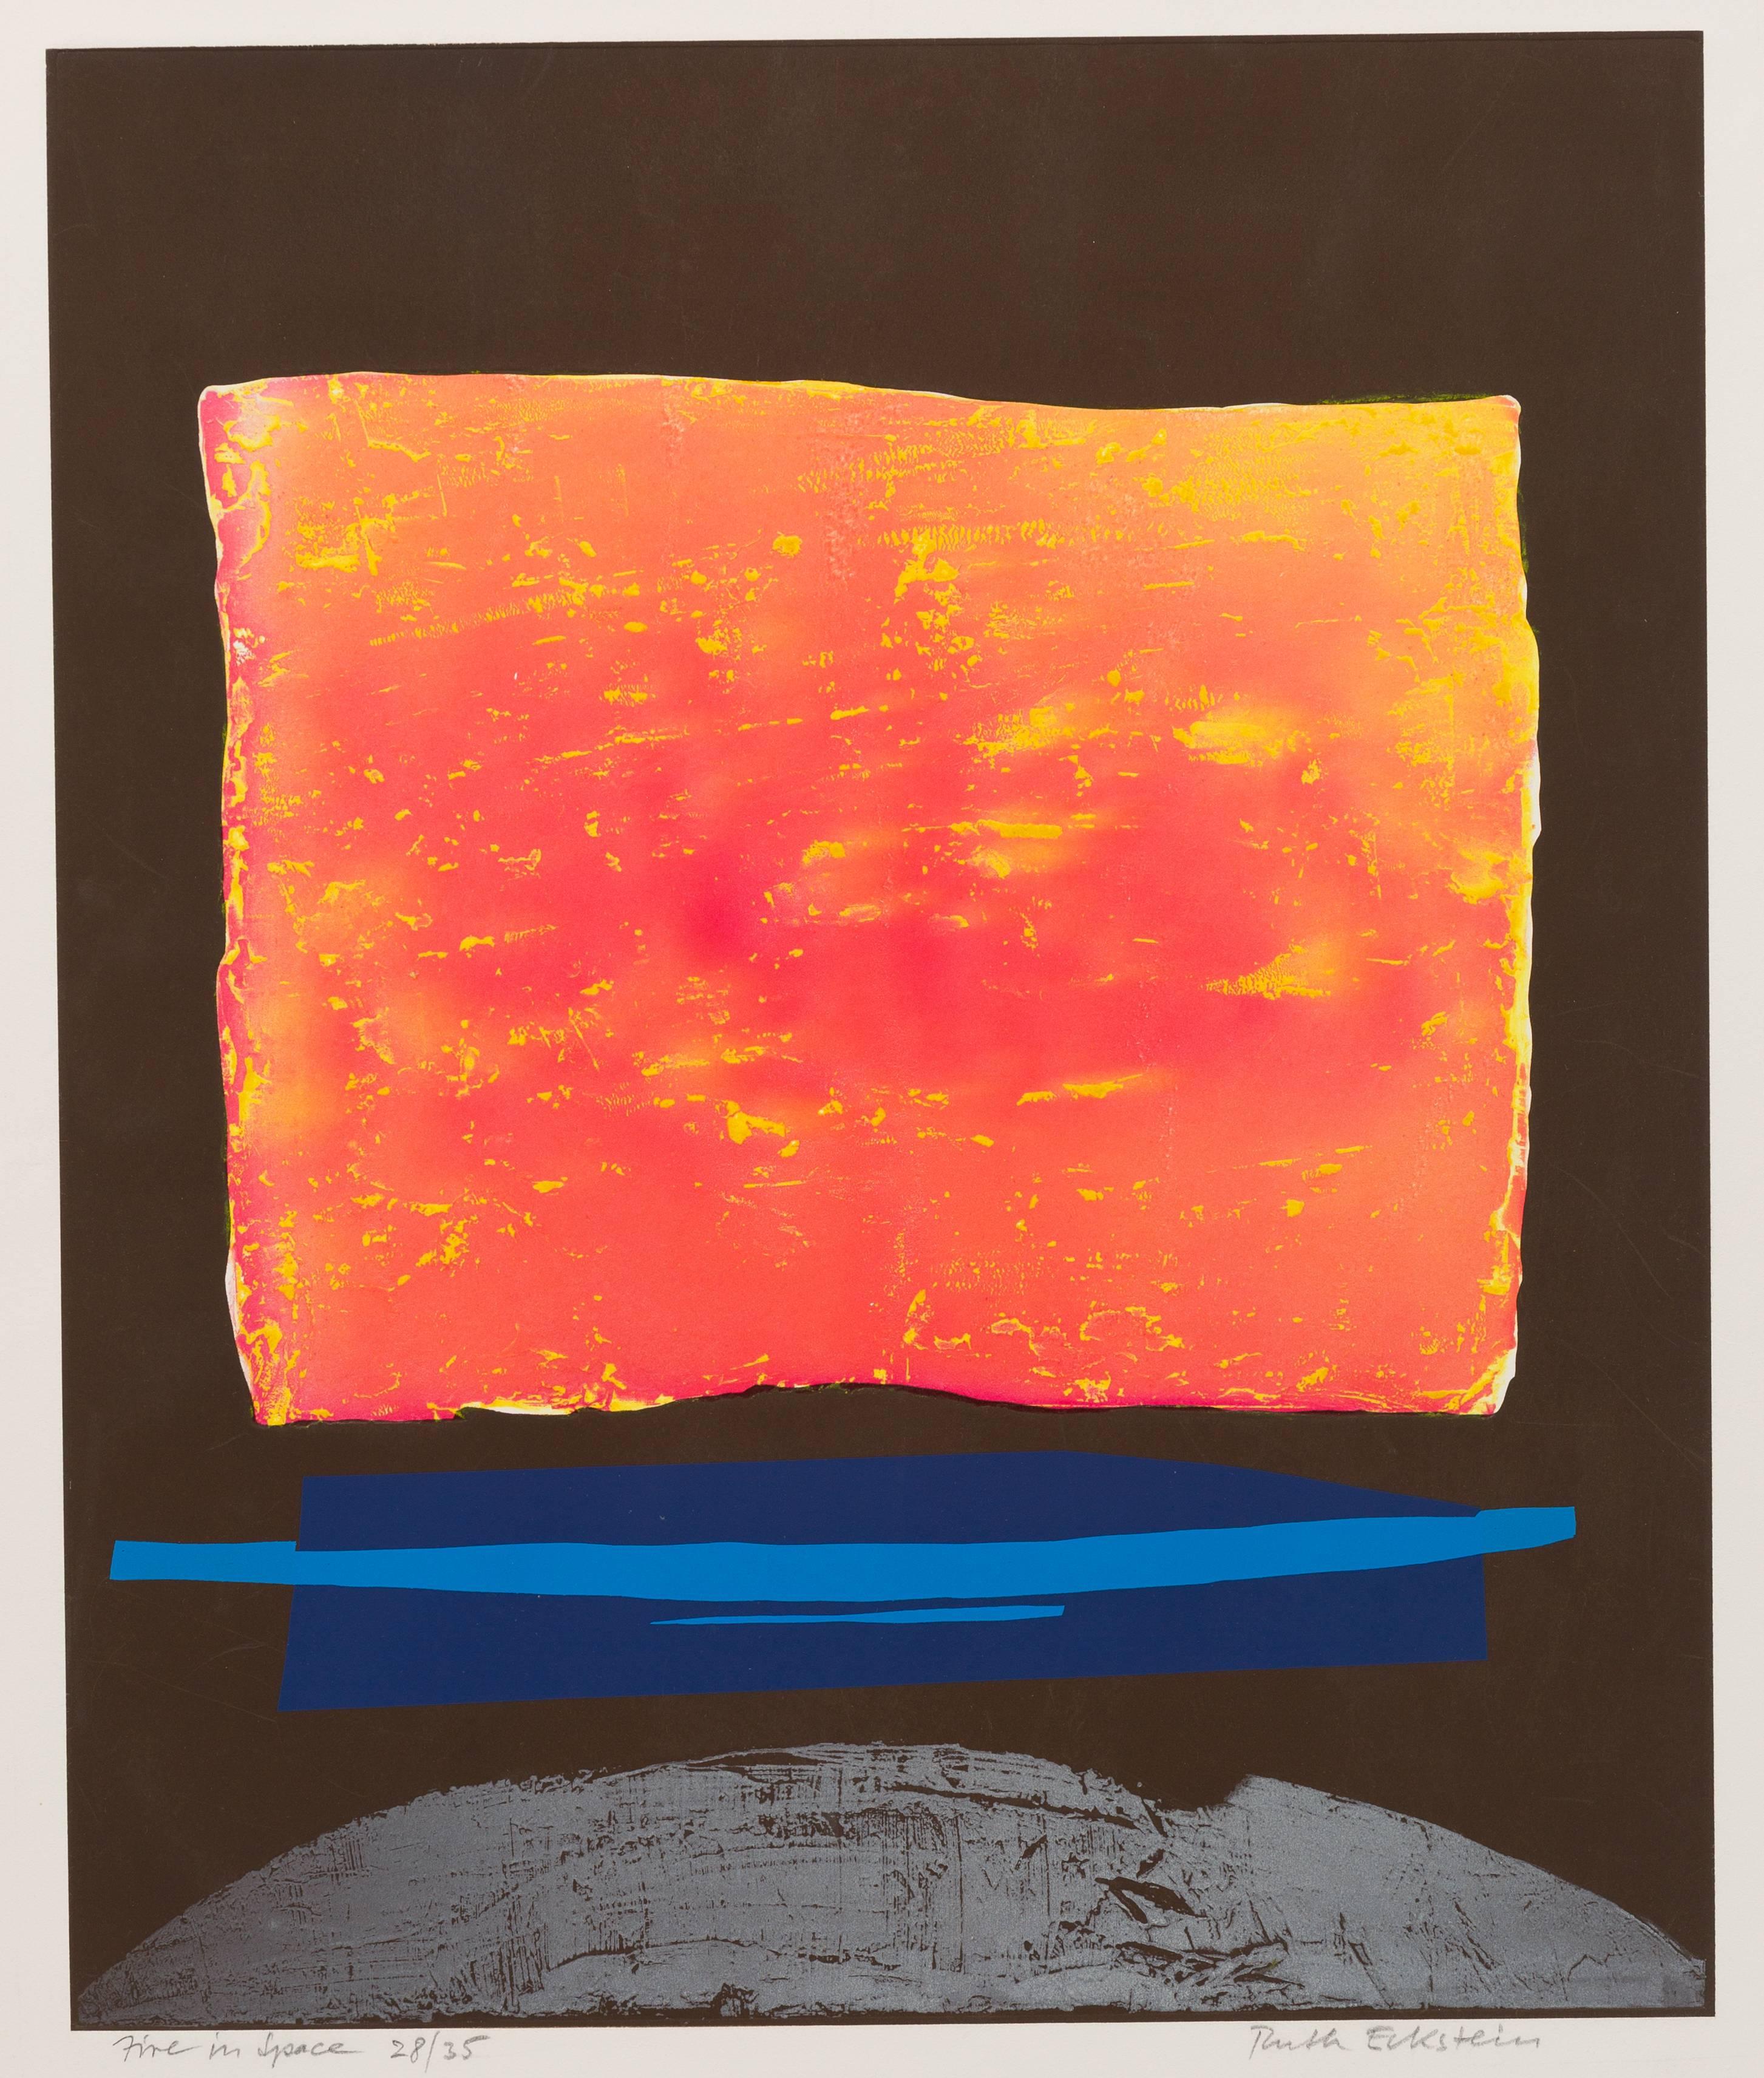 Ruth Eckstein Abstract Print - Fire In Space